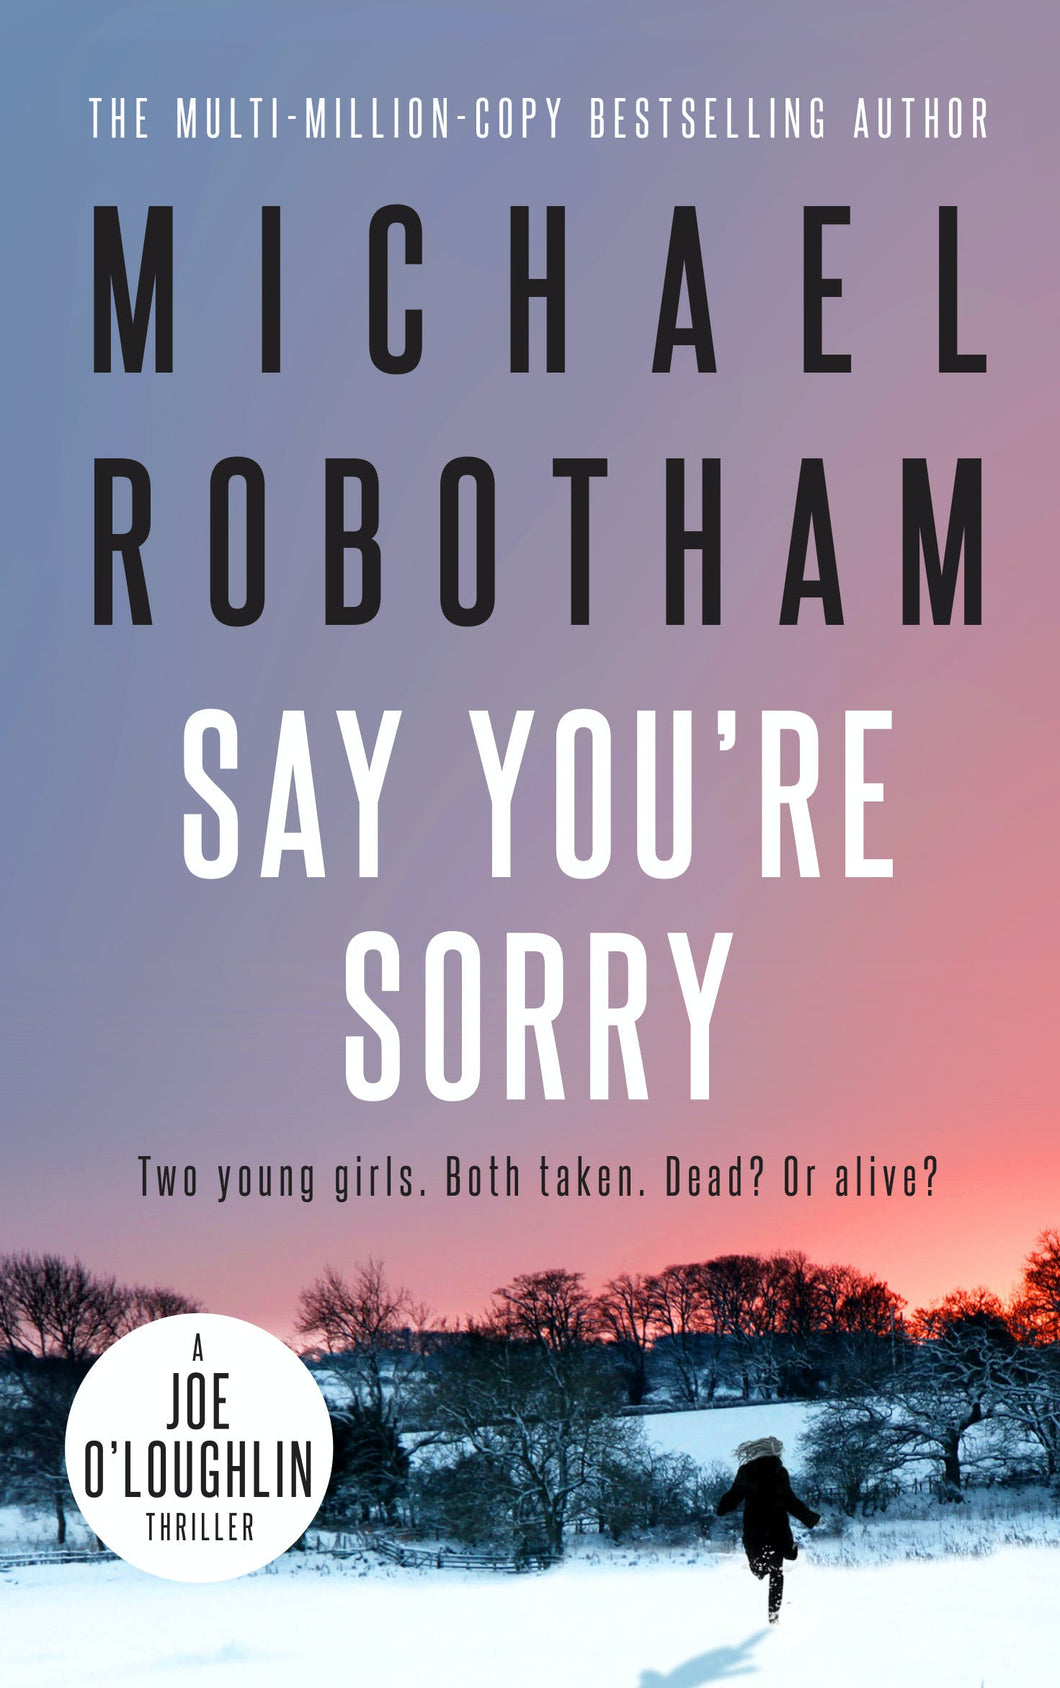 Say You're Sorry by Michael Robotham: stock image of front cover.